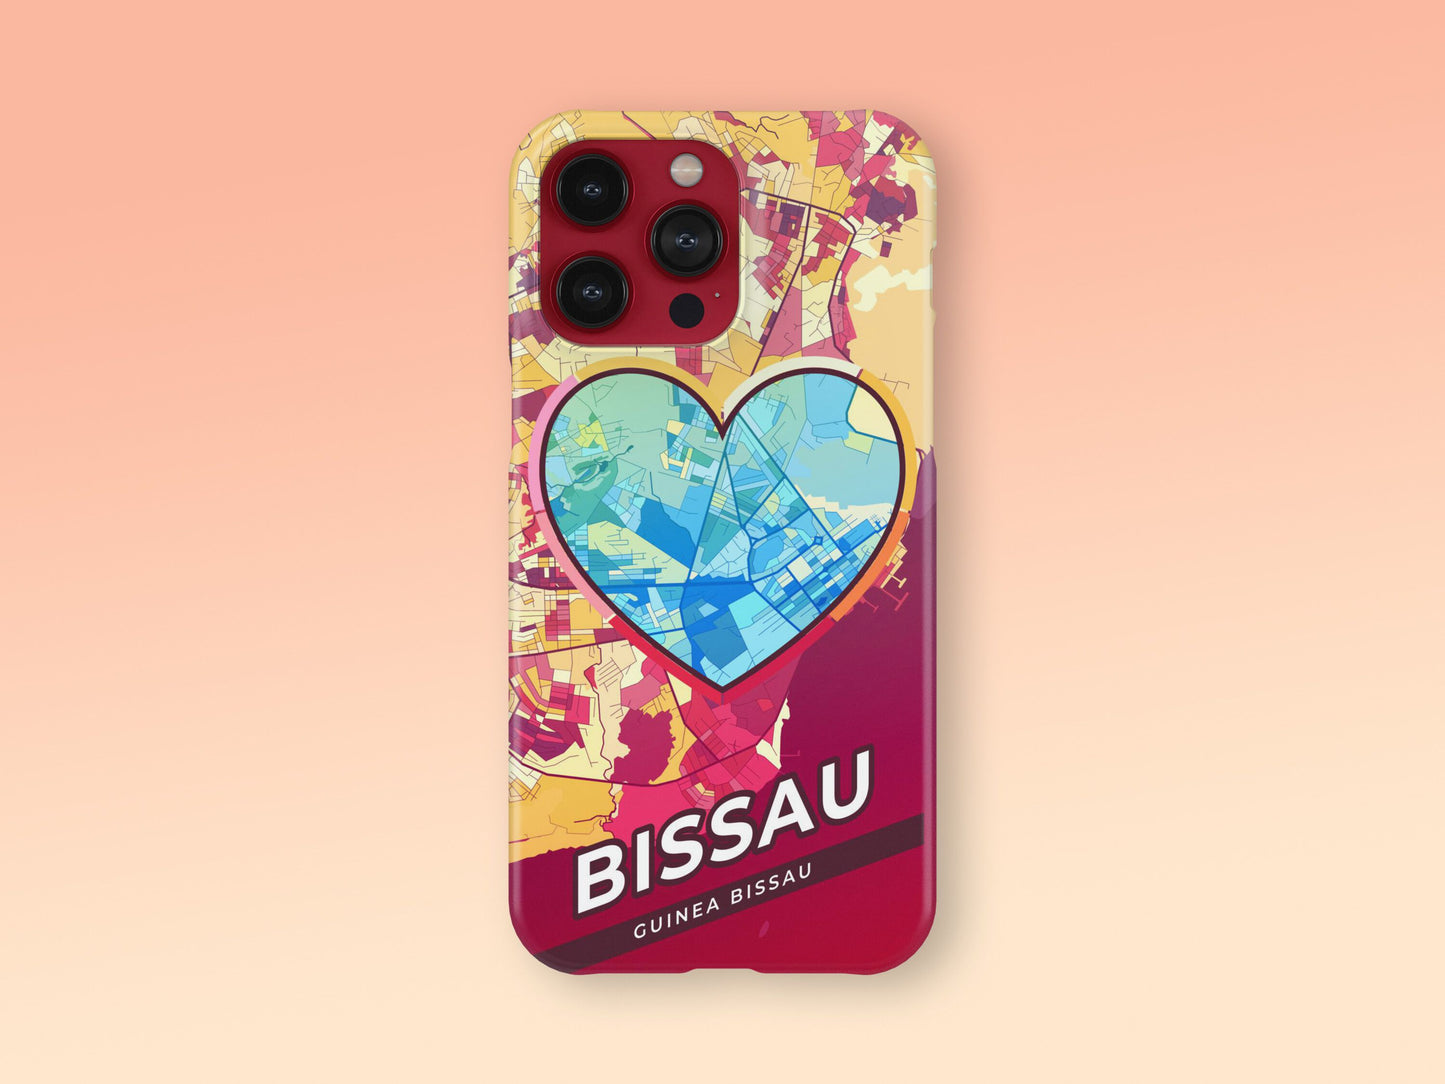 Bissau Guinea Bissau slim phone case with colorful icon. Birthday, wedding or housewarming gift. Couple match cases. 2